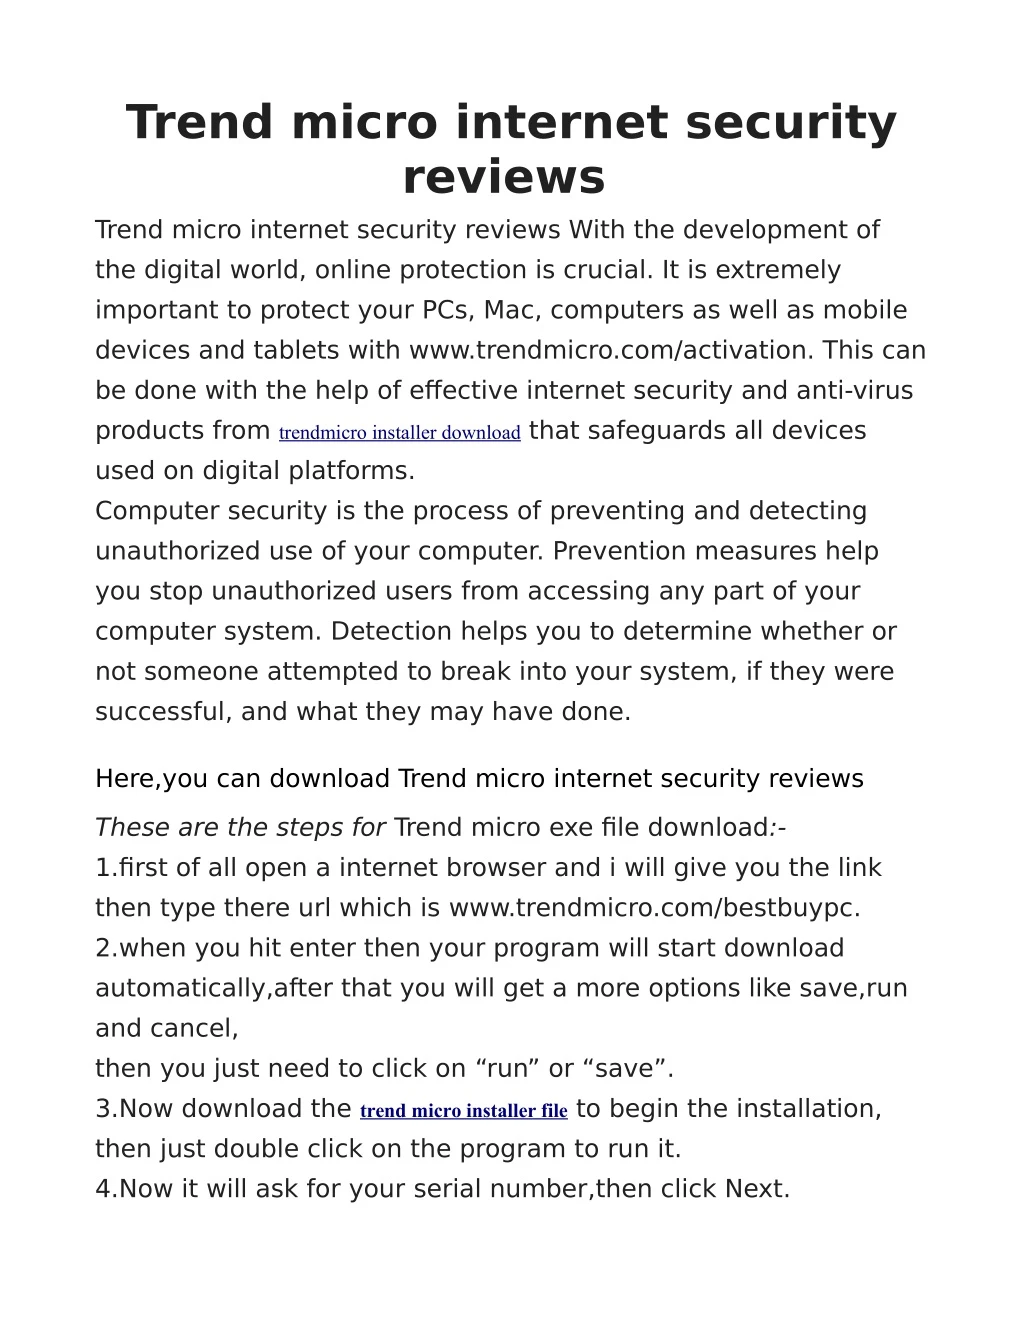 trend micro internet security reviews trend micro